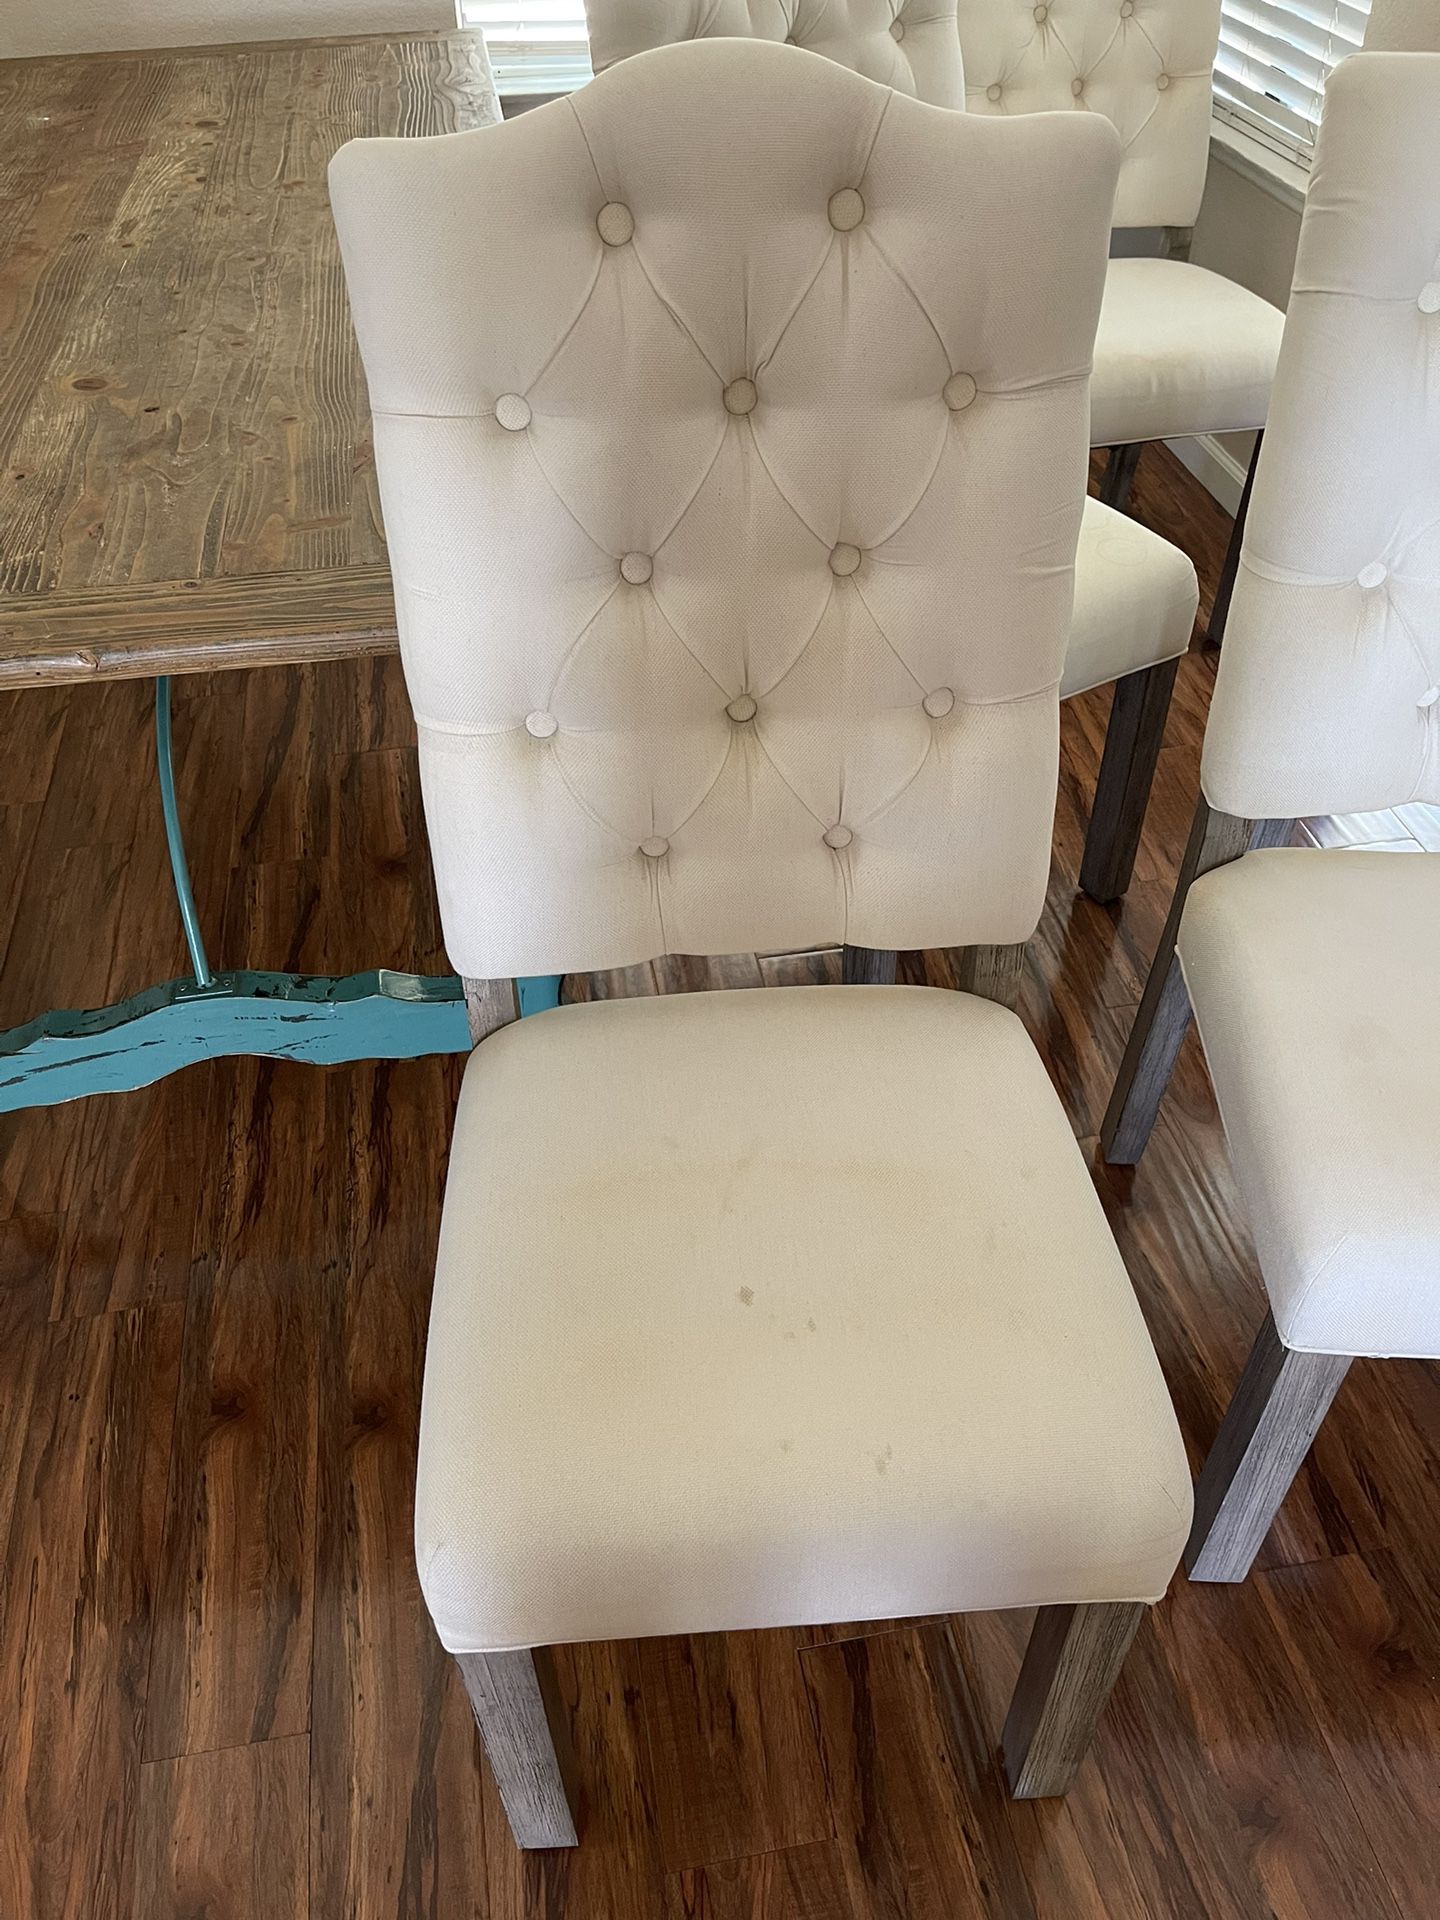 Kitchen Chair $350 For 6 